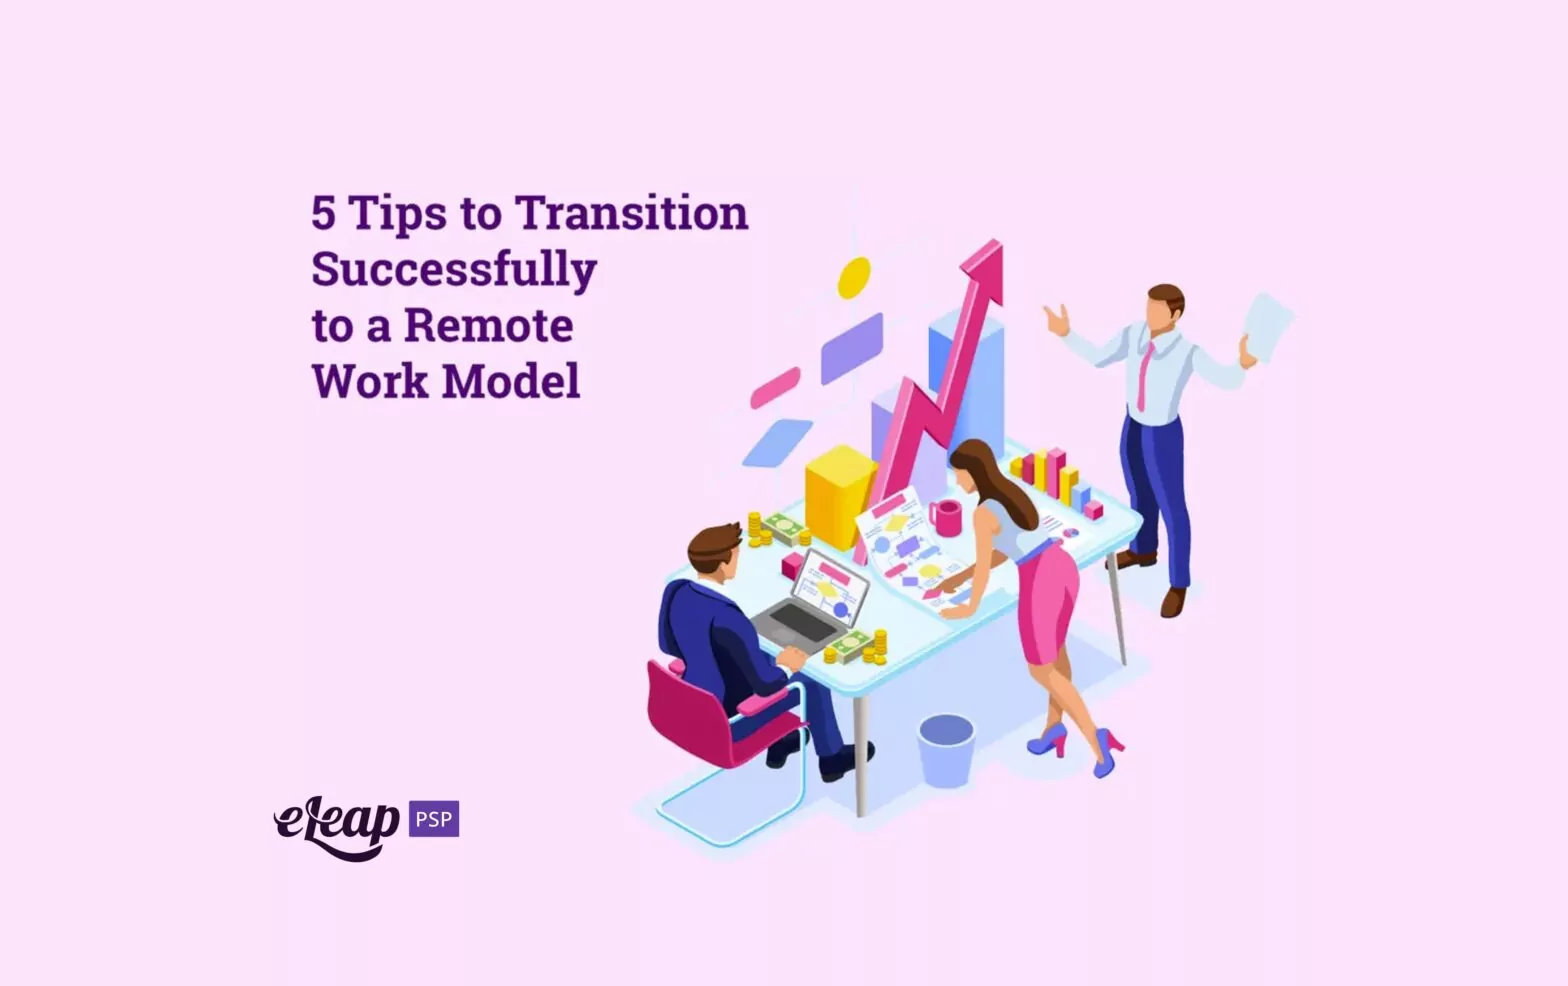 5 Tips to Transition Successfully to a Remote Work Model